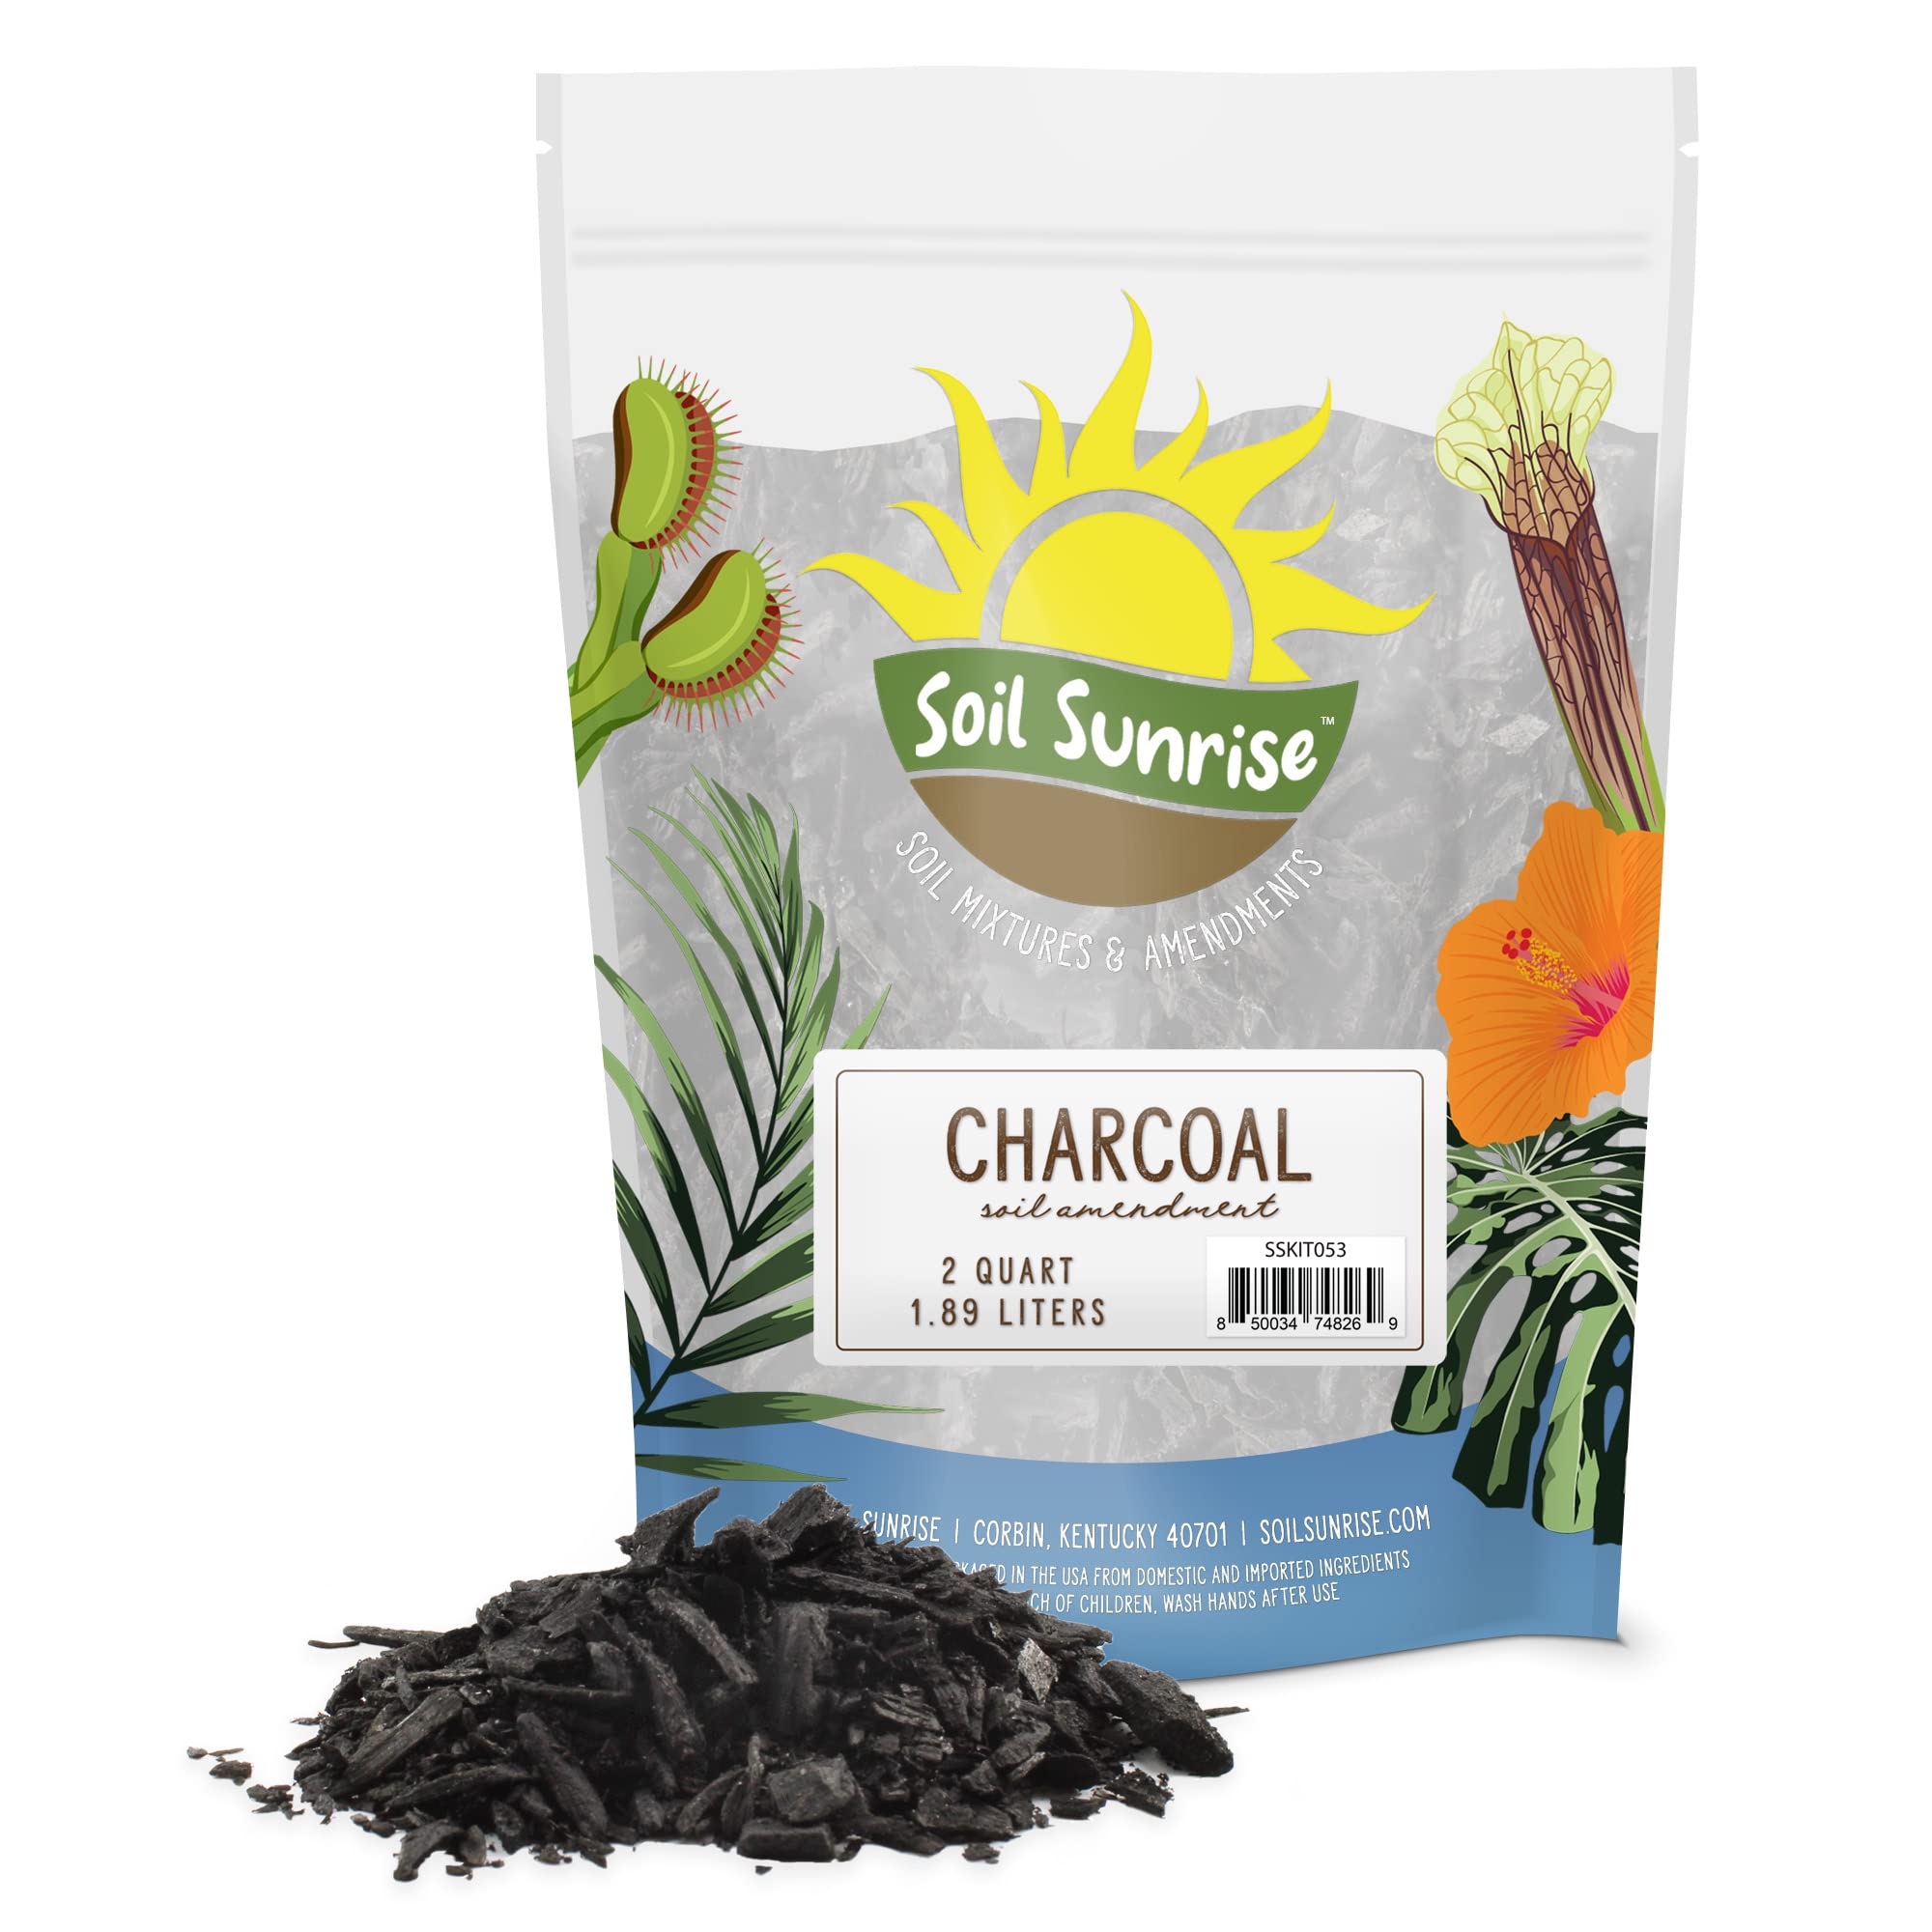 Soil Sunrise Horticultural Charcoal for Indoor Plants (2 Quarts), Hardwood Soil Amendment for Orchids, Terrariums, and Gardening